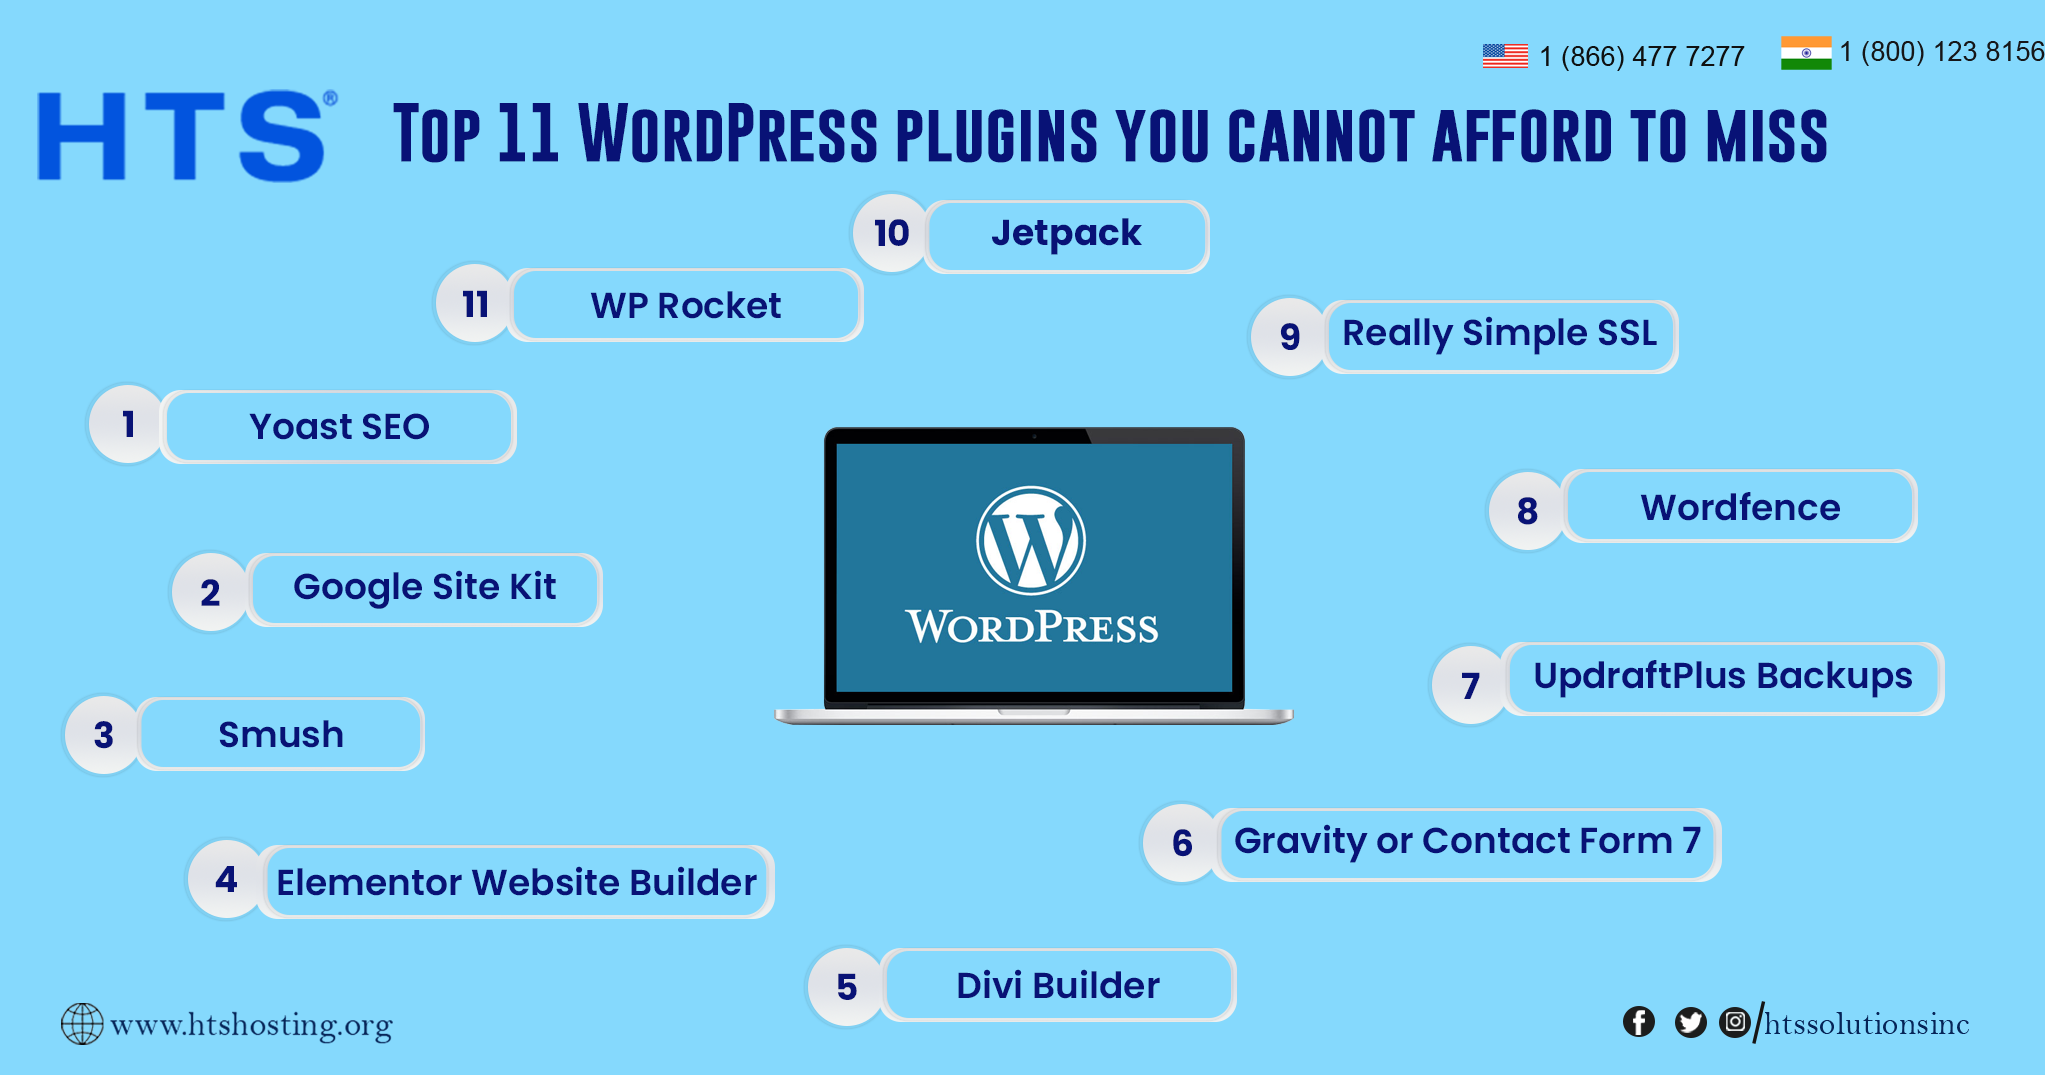 Top 11 WordPress plugins you cannot afford to miss